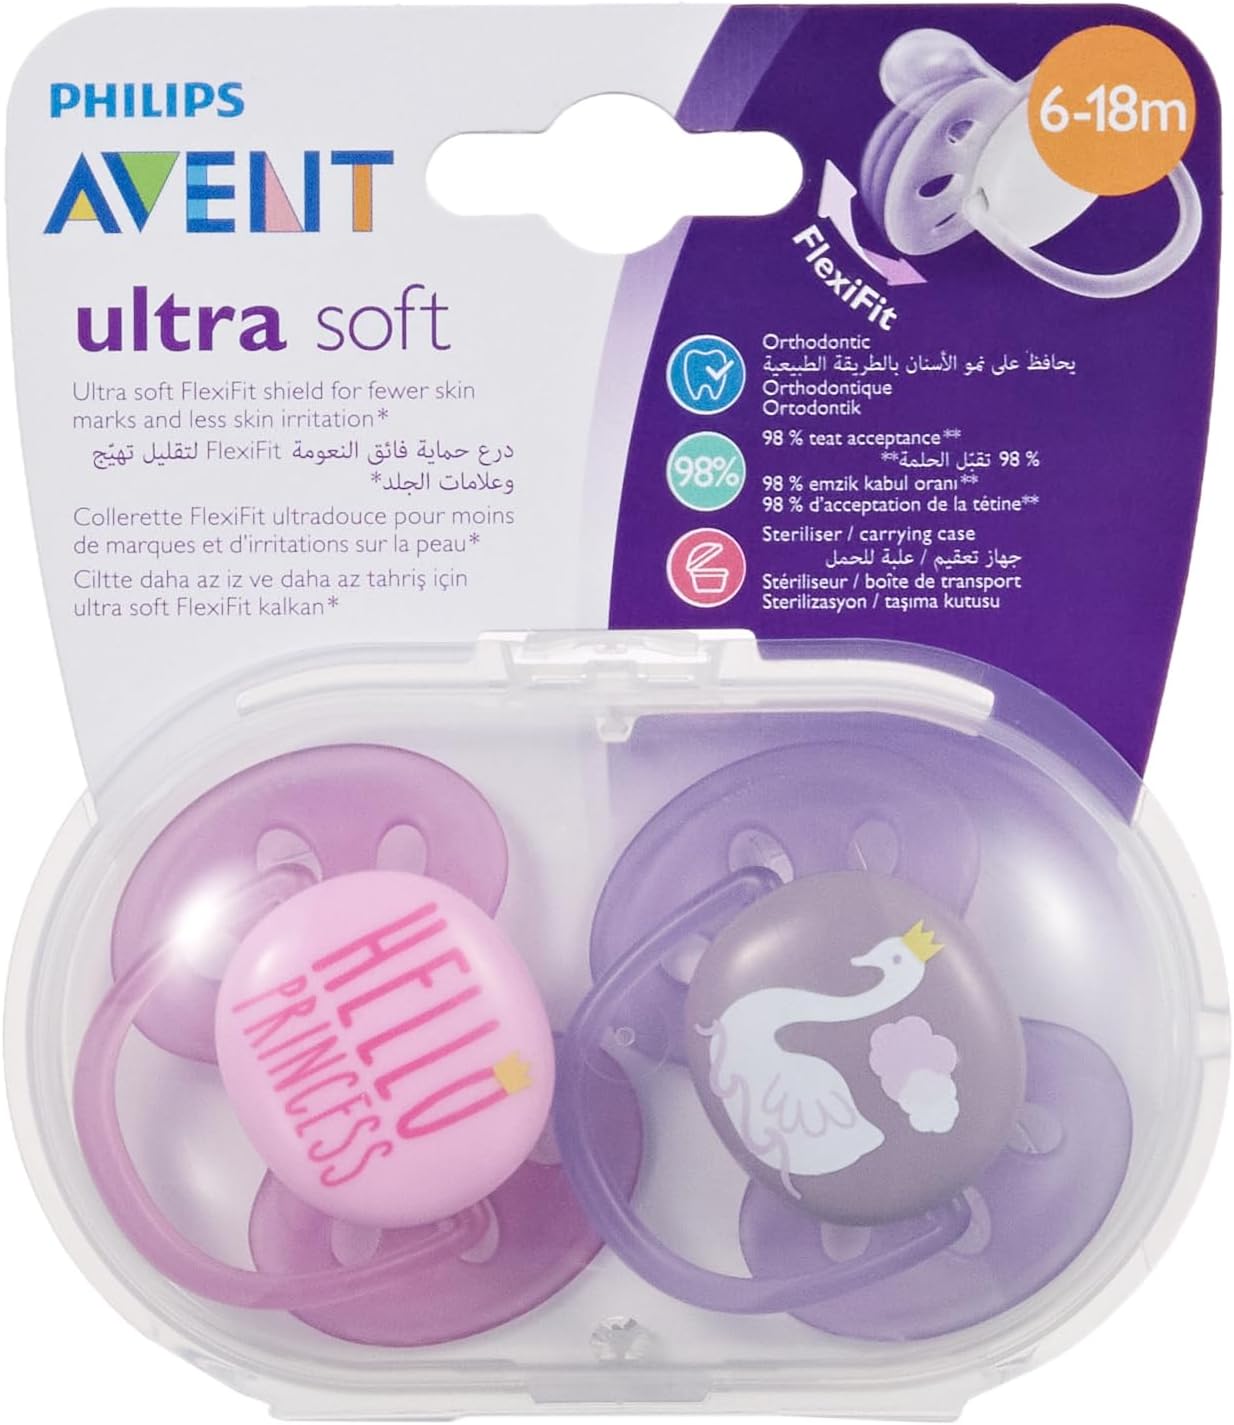 Philips Avent STHR SIL 6-18M Ultra Soft X 2 Girl